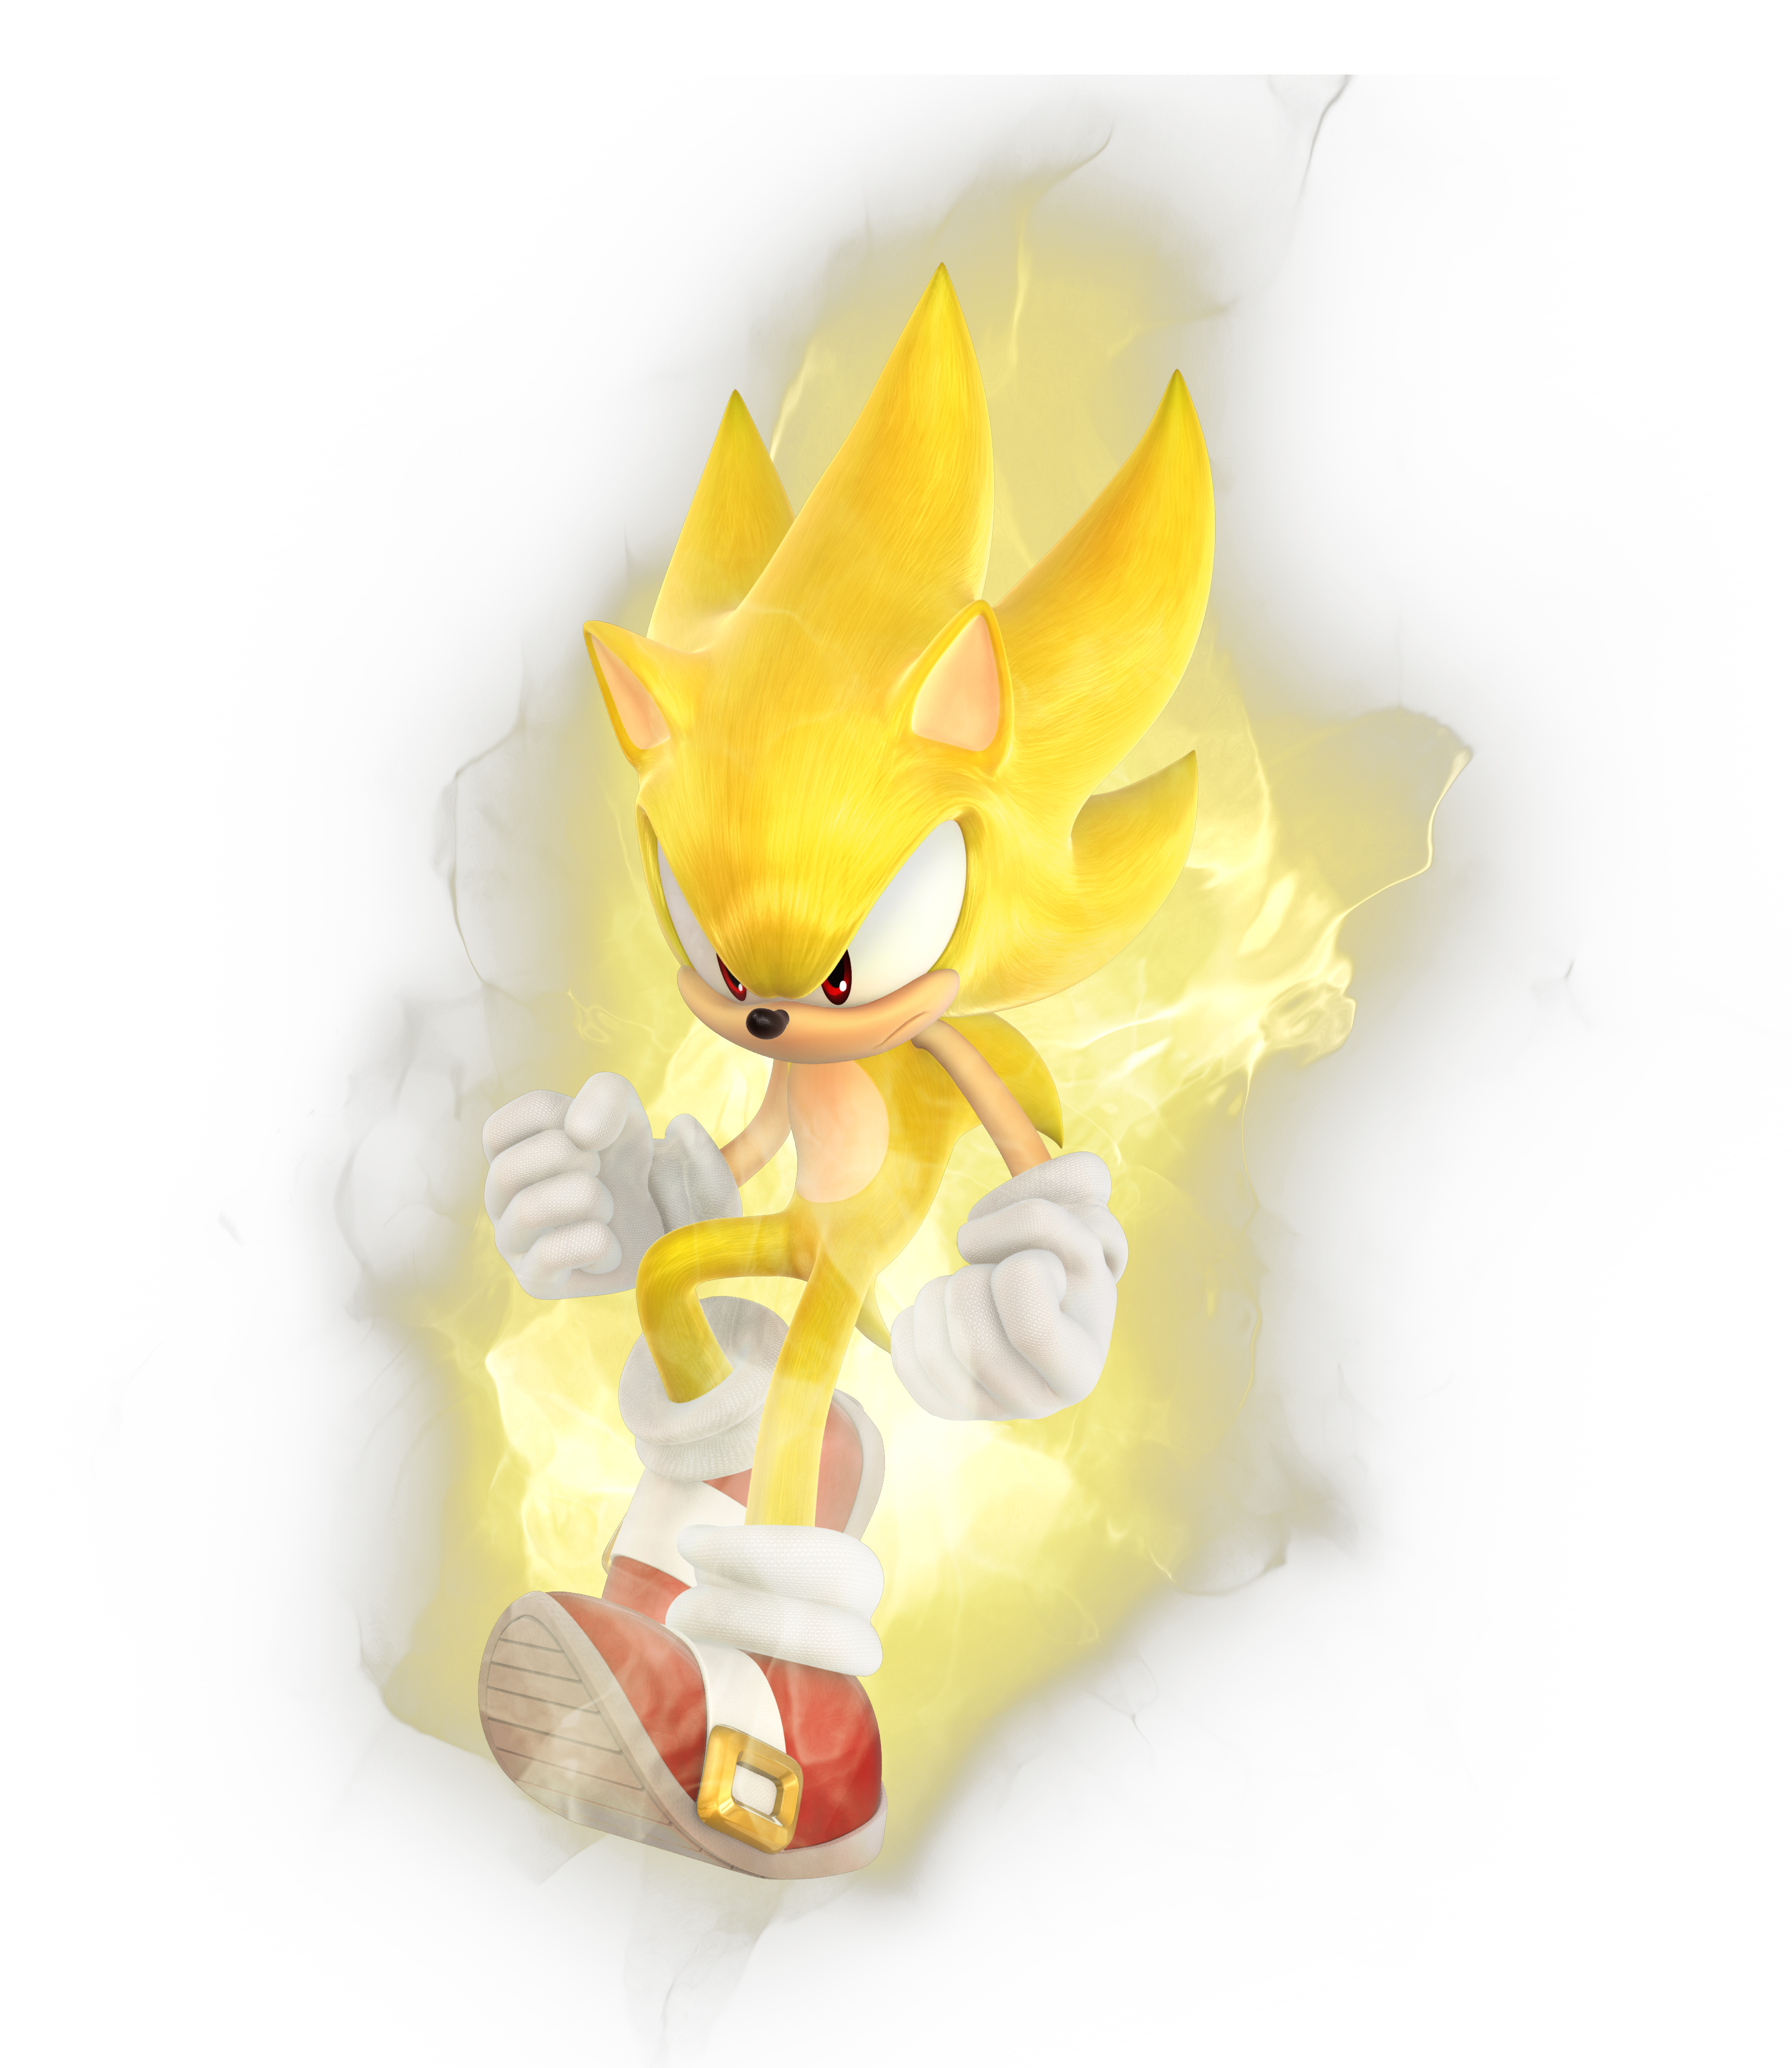 An official render of Super Sonic by SEGA.